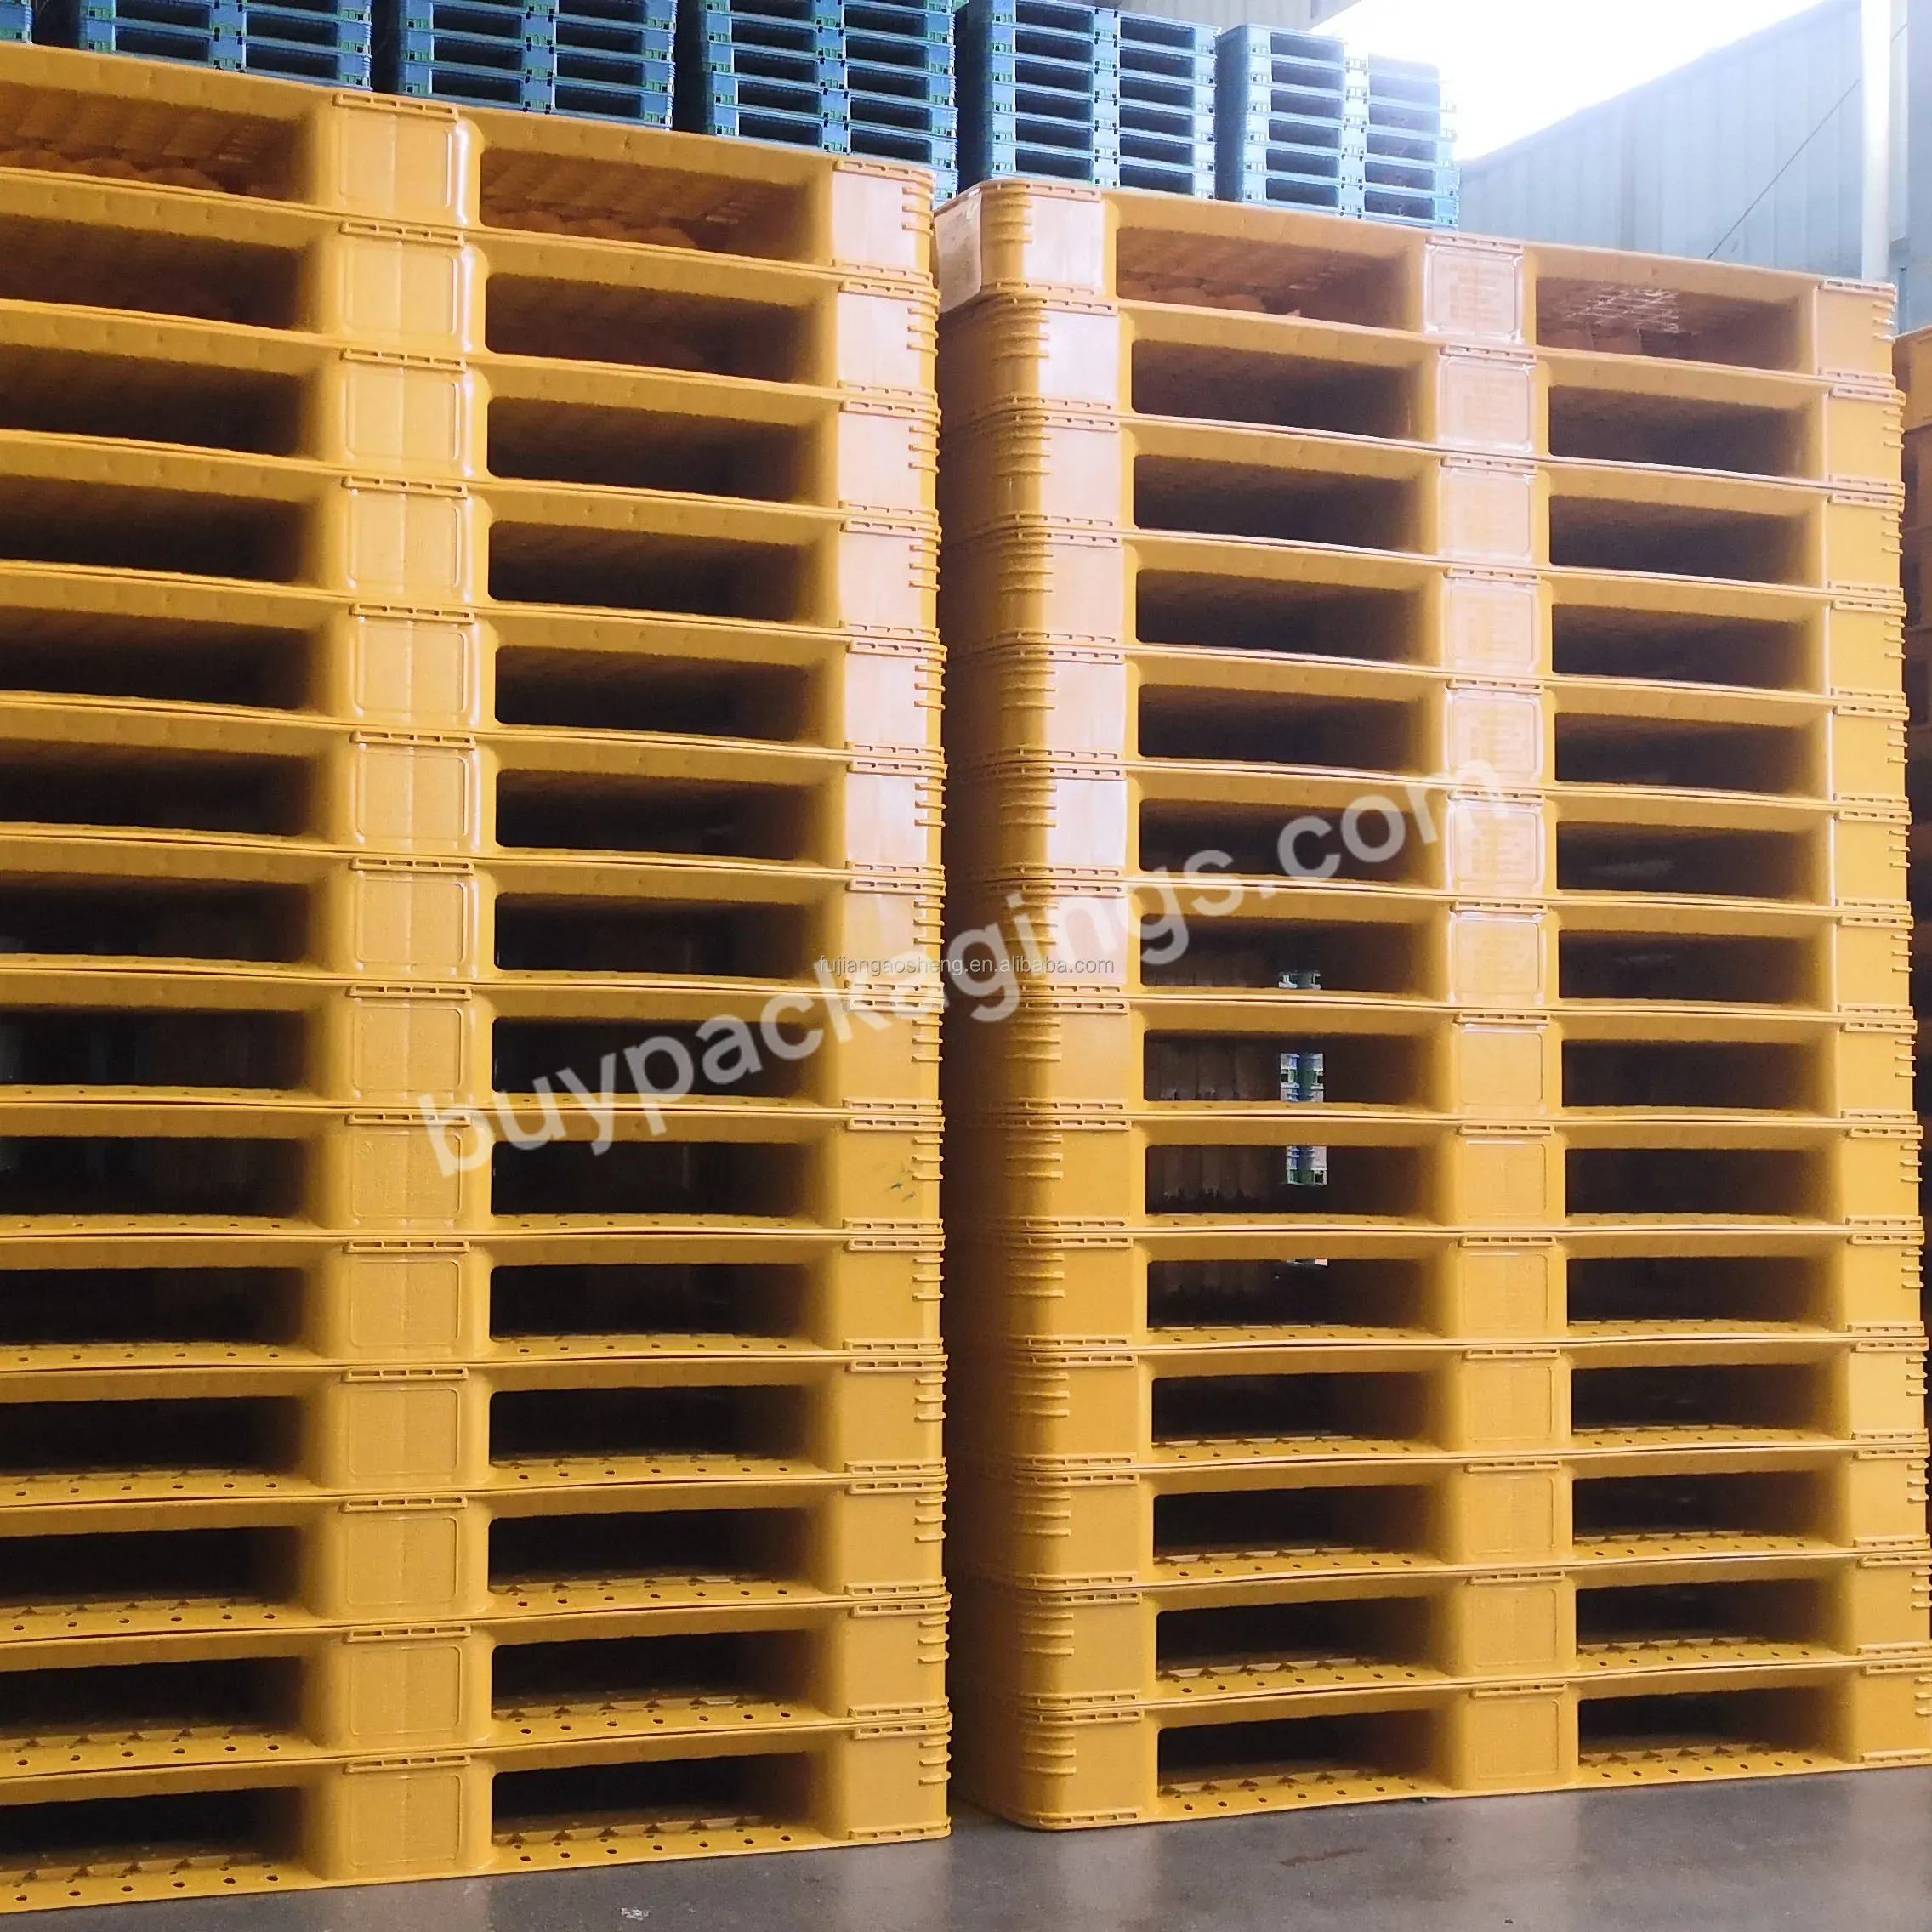 Cheap Price Shipping Storage Heavy Duty Euro Hdpe Large Stackable Reversible Plastic Pallet